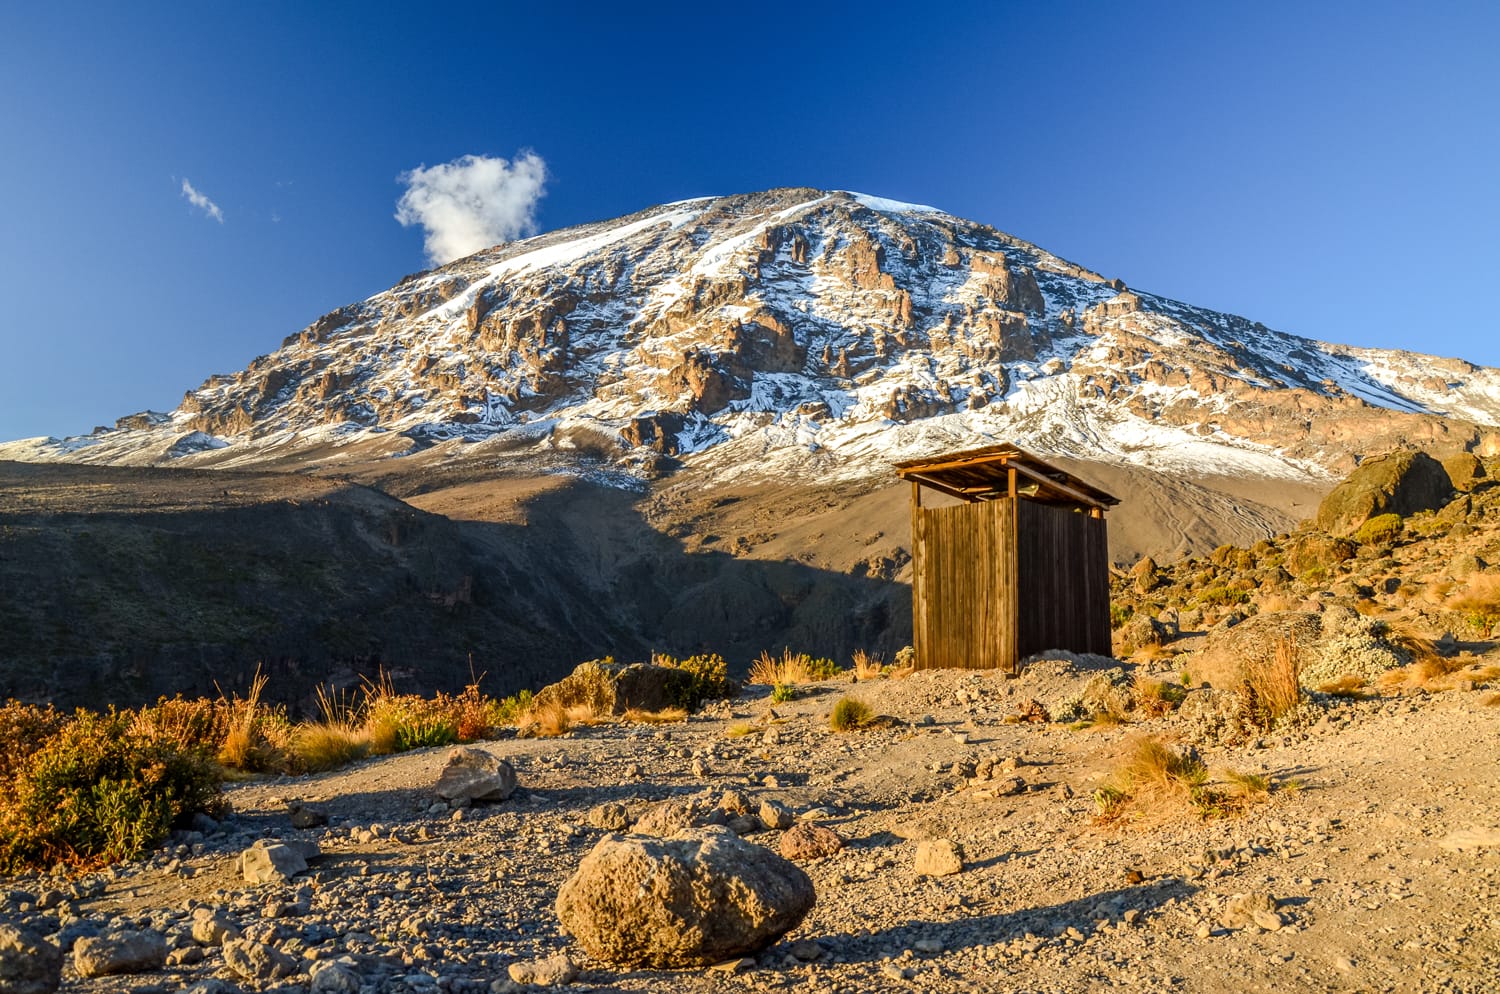 Evening view of Kibo with Uhuru Peak (5895m amsl, highest mountain in Africa) at Mount Kilimanjaro,Kilimanjaro National Park,seen from Karanga Camp at 3995m amsl. Toilet outhouse in foreground.